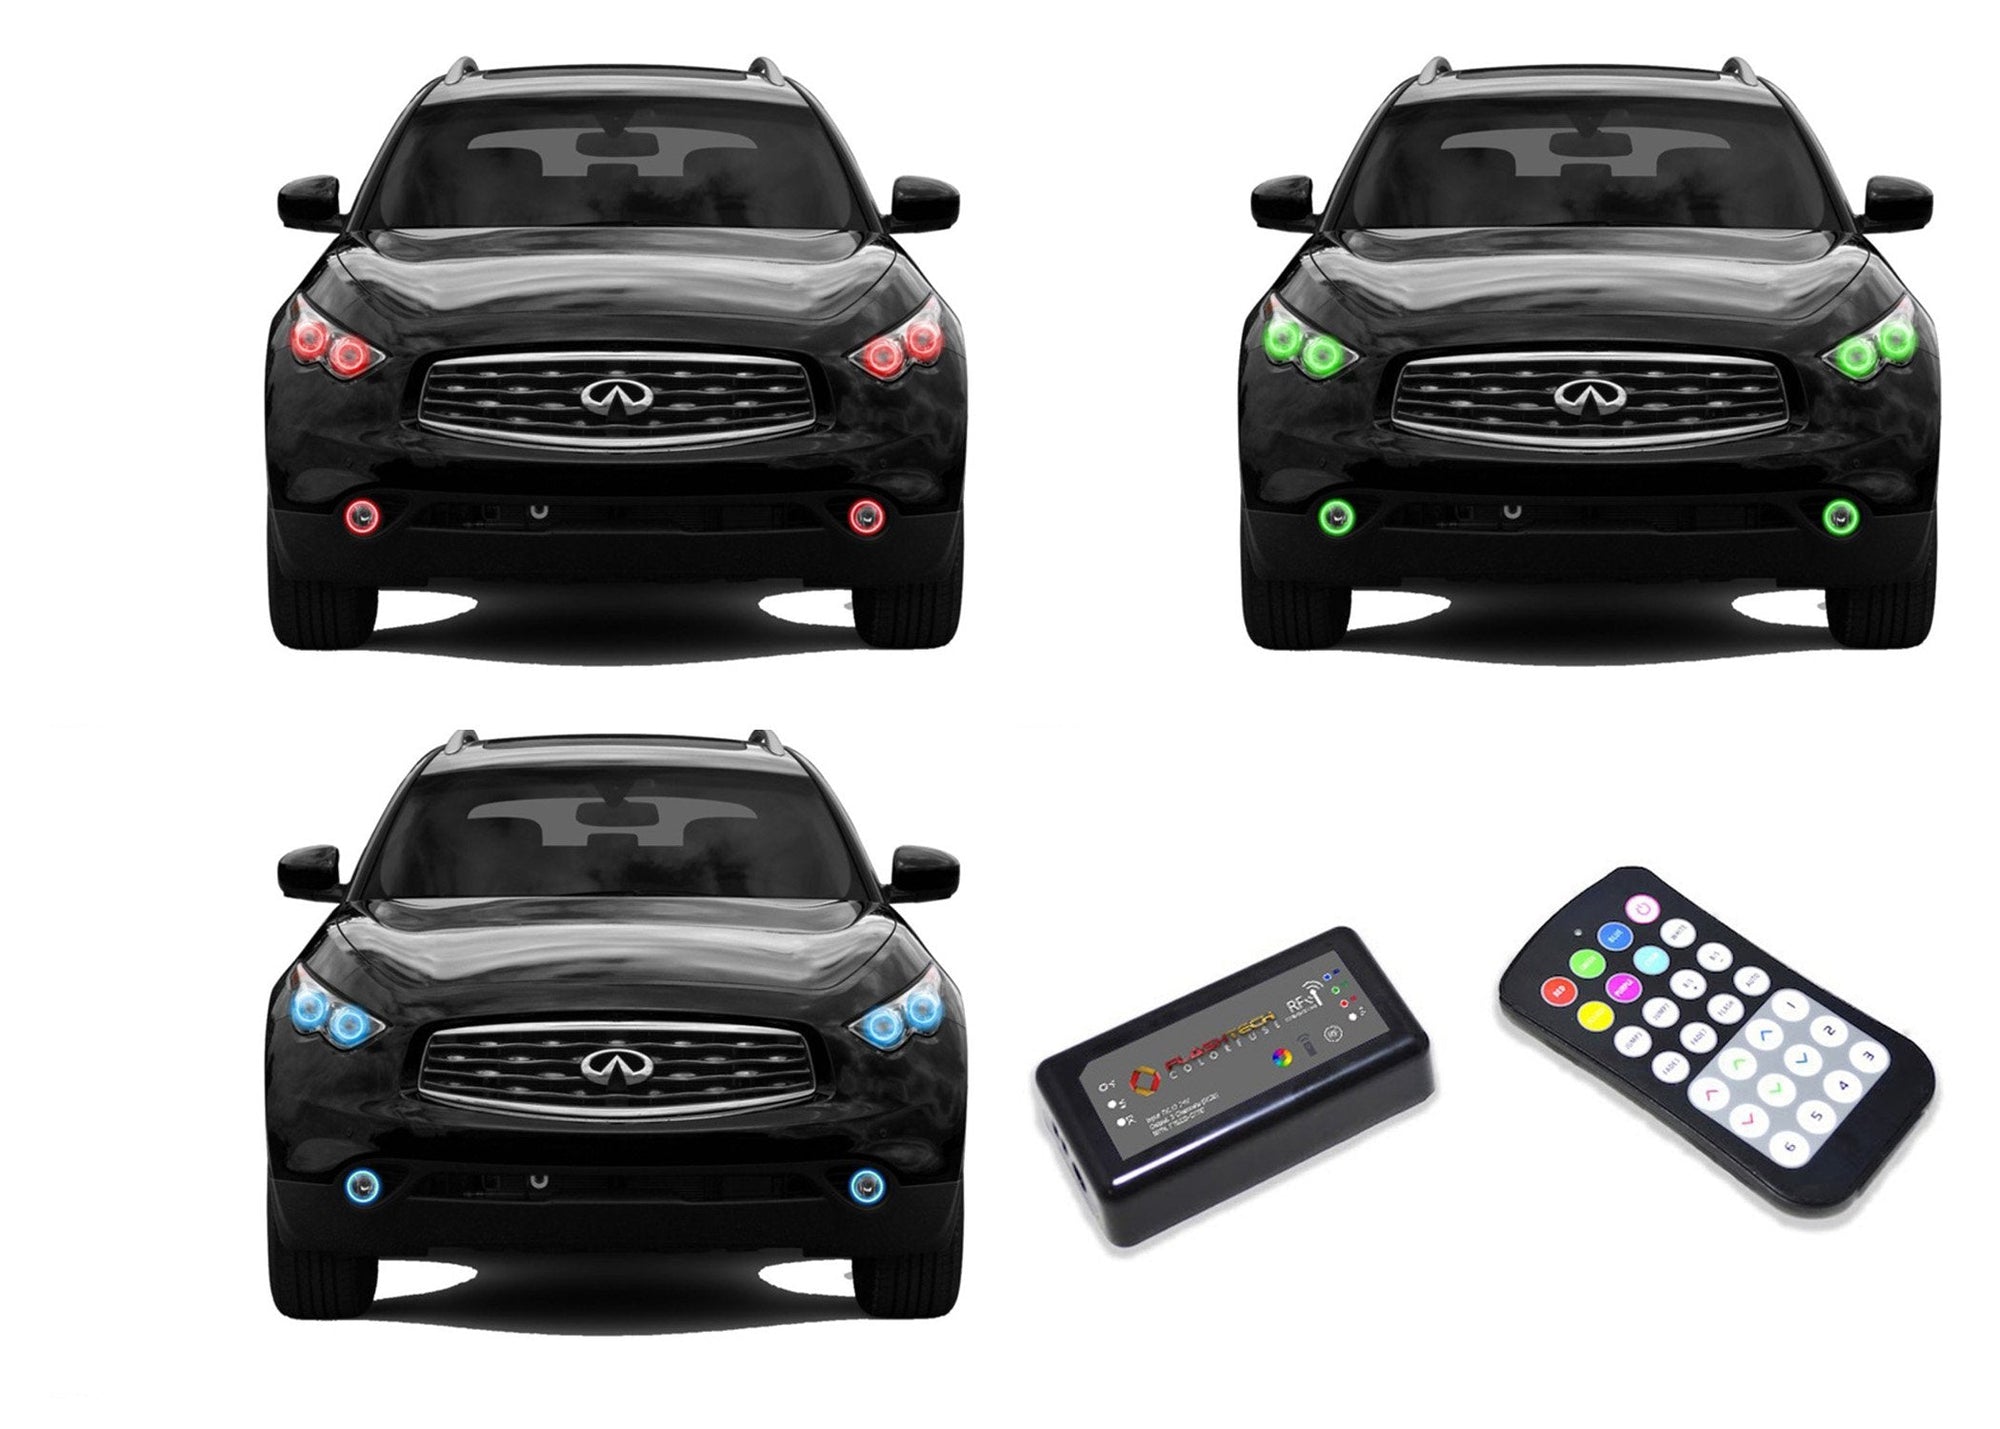 Infiniti-FX50-2009, 2010, 2011, 2012-LED-Halo-Headlights and Fog Lights-RGB-Colorfuse RF Remote-IN-FX500912-V3HFCFRF